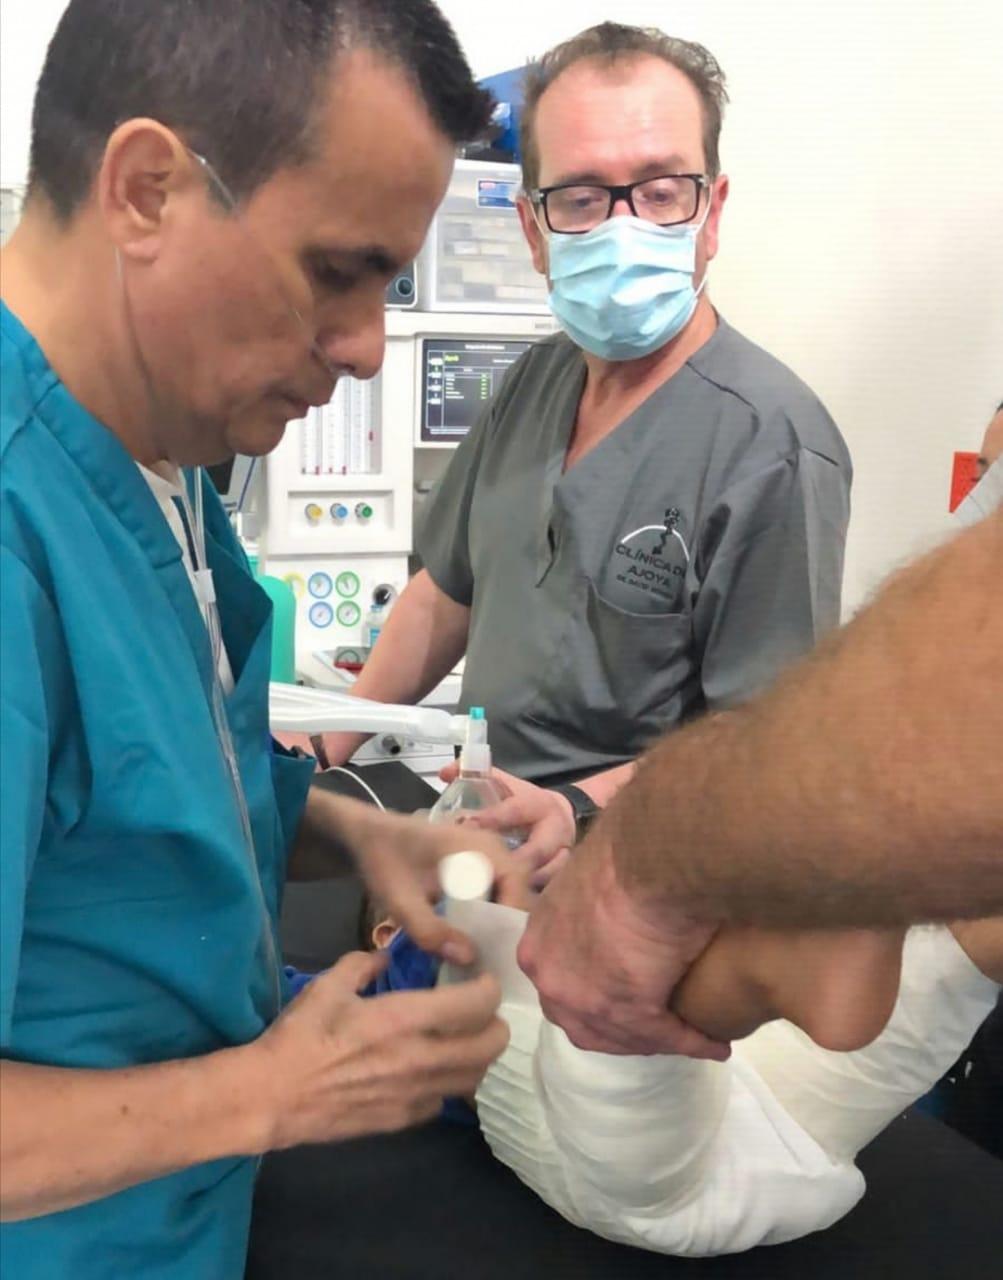 Dr. Renán, now with cancer so advanced he had to breath oxygen through a nose-tube, continued to volunteer at the Ajoya Clinic until weeks before he died.